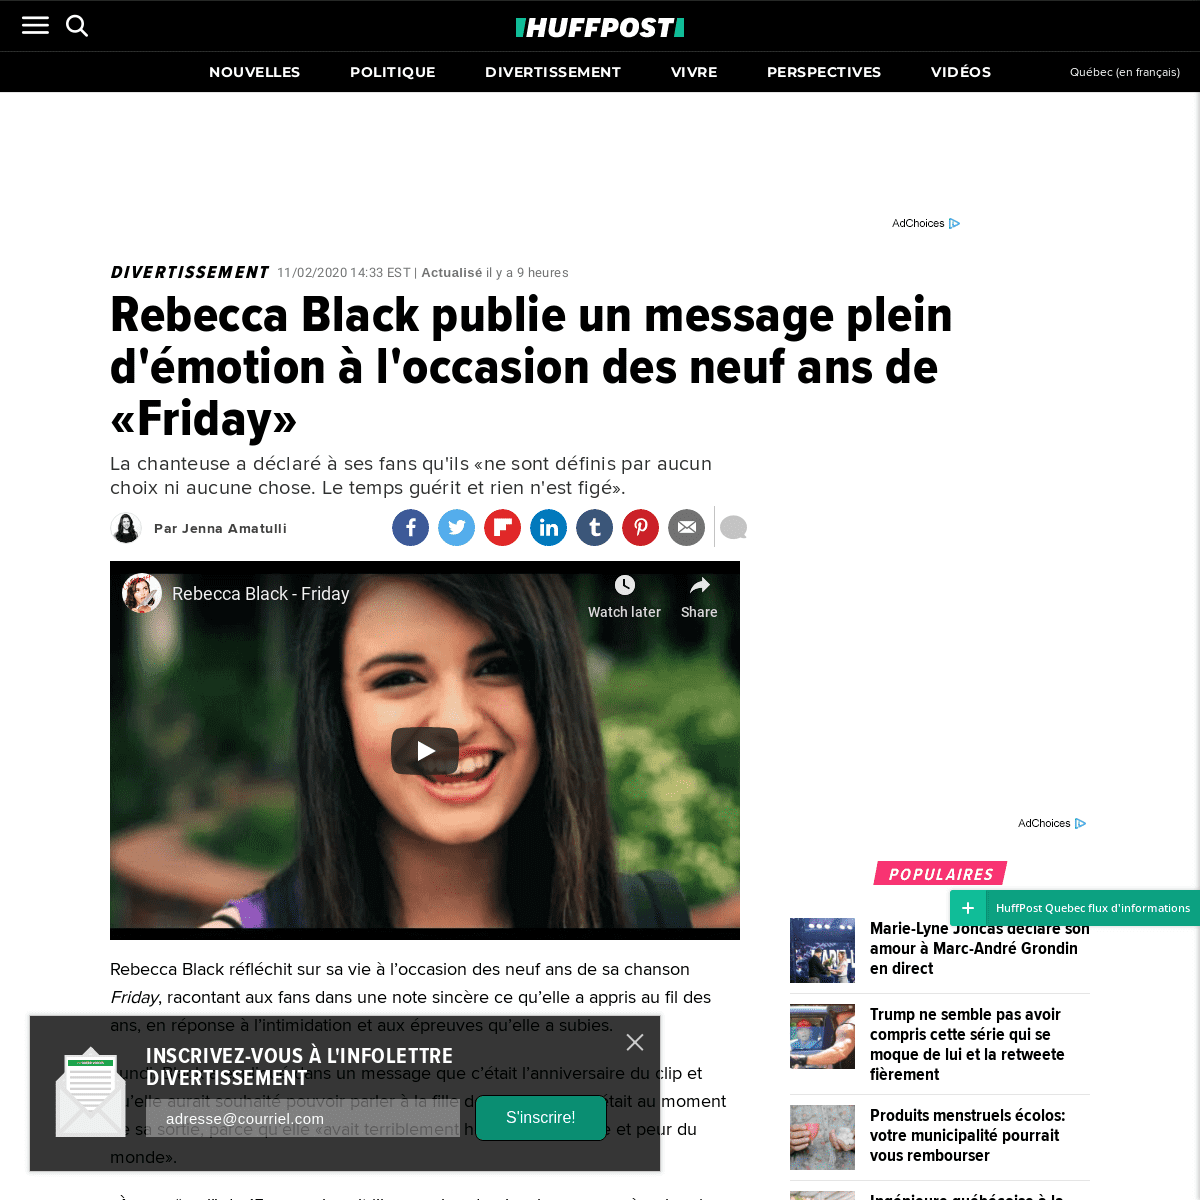 A complete backup of quebec.huffingtonpost.ca/entry/rebecca-black-publie-message-plein-emotion-occasion-9-ans-friday_qc_5e42f264